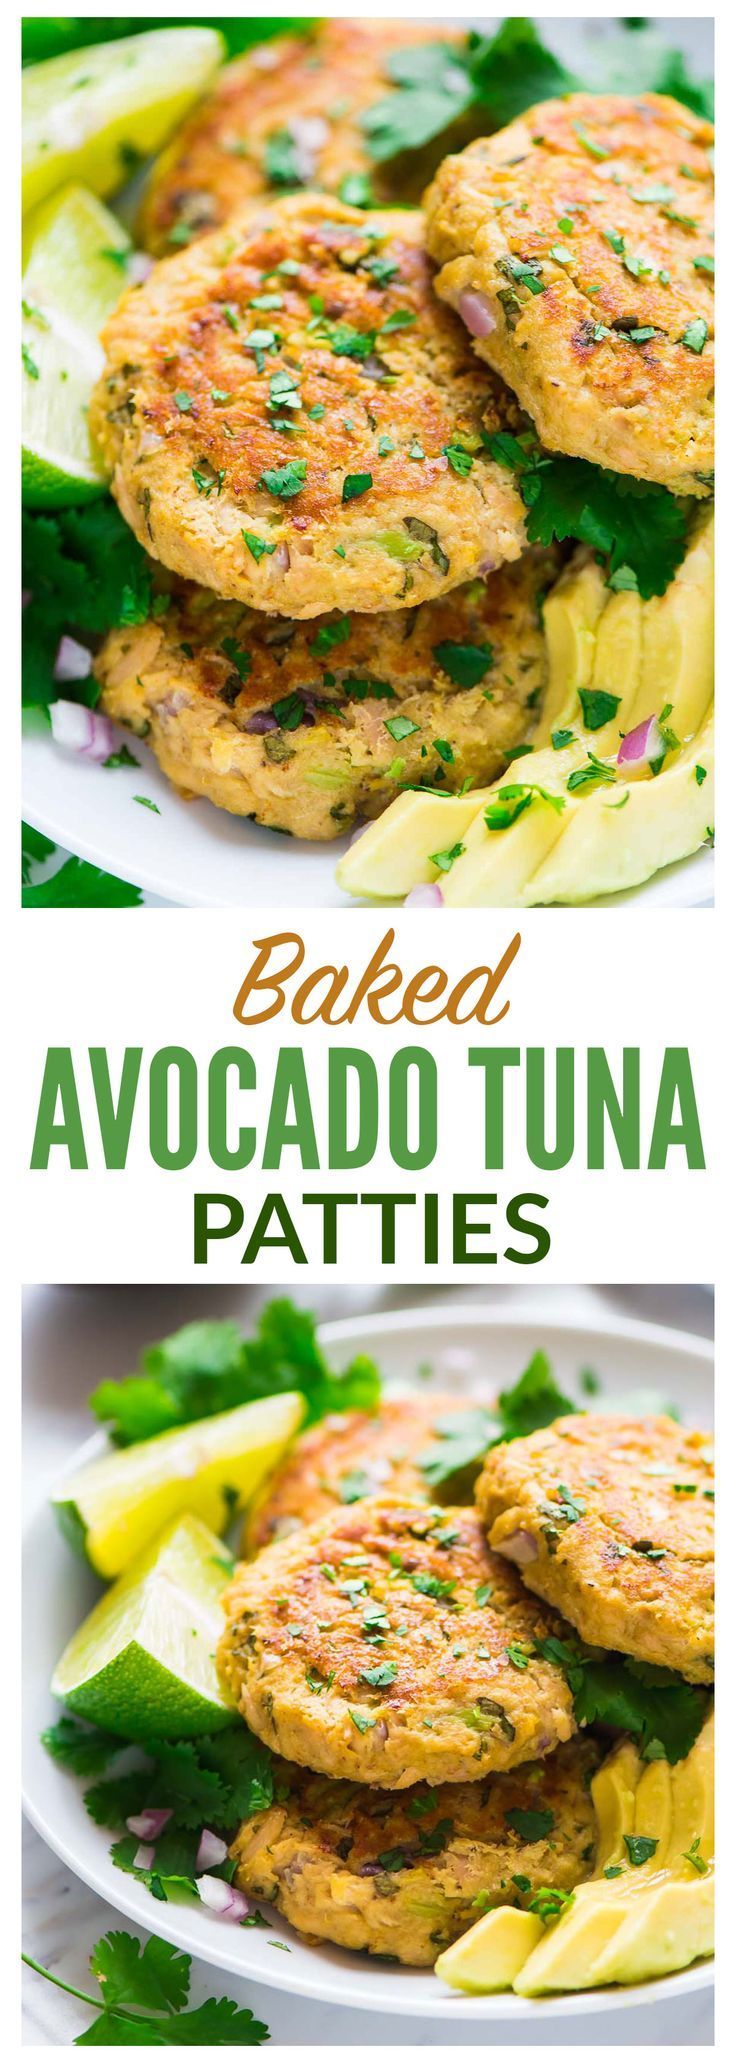 Baked Avocado Tuna Cakes. Only 86 calories each! Quick, easy, and healthy. The best thing you can do with canned tuna!